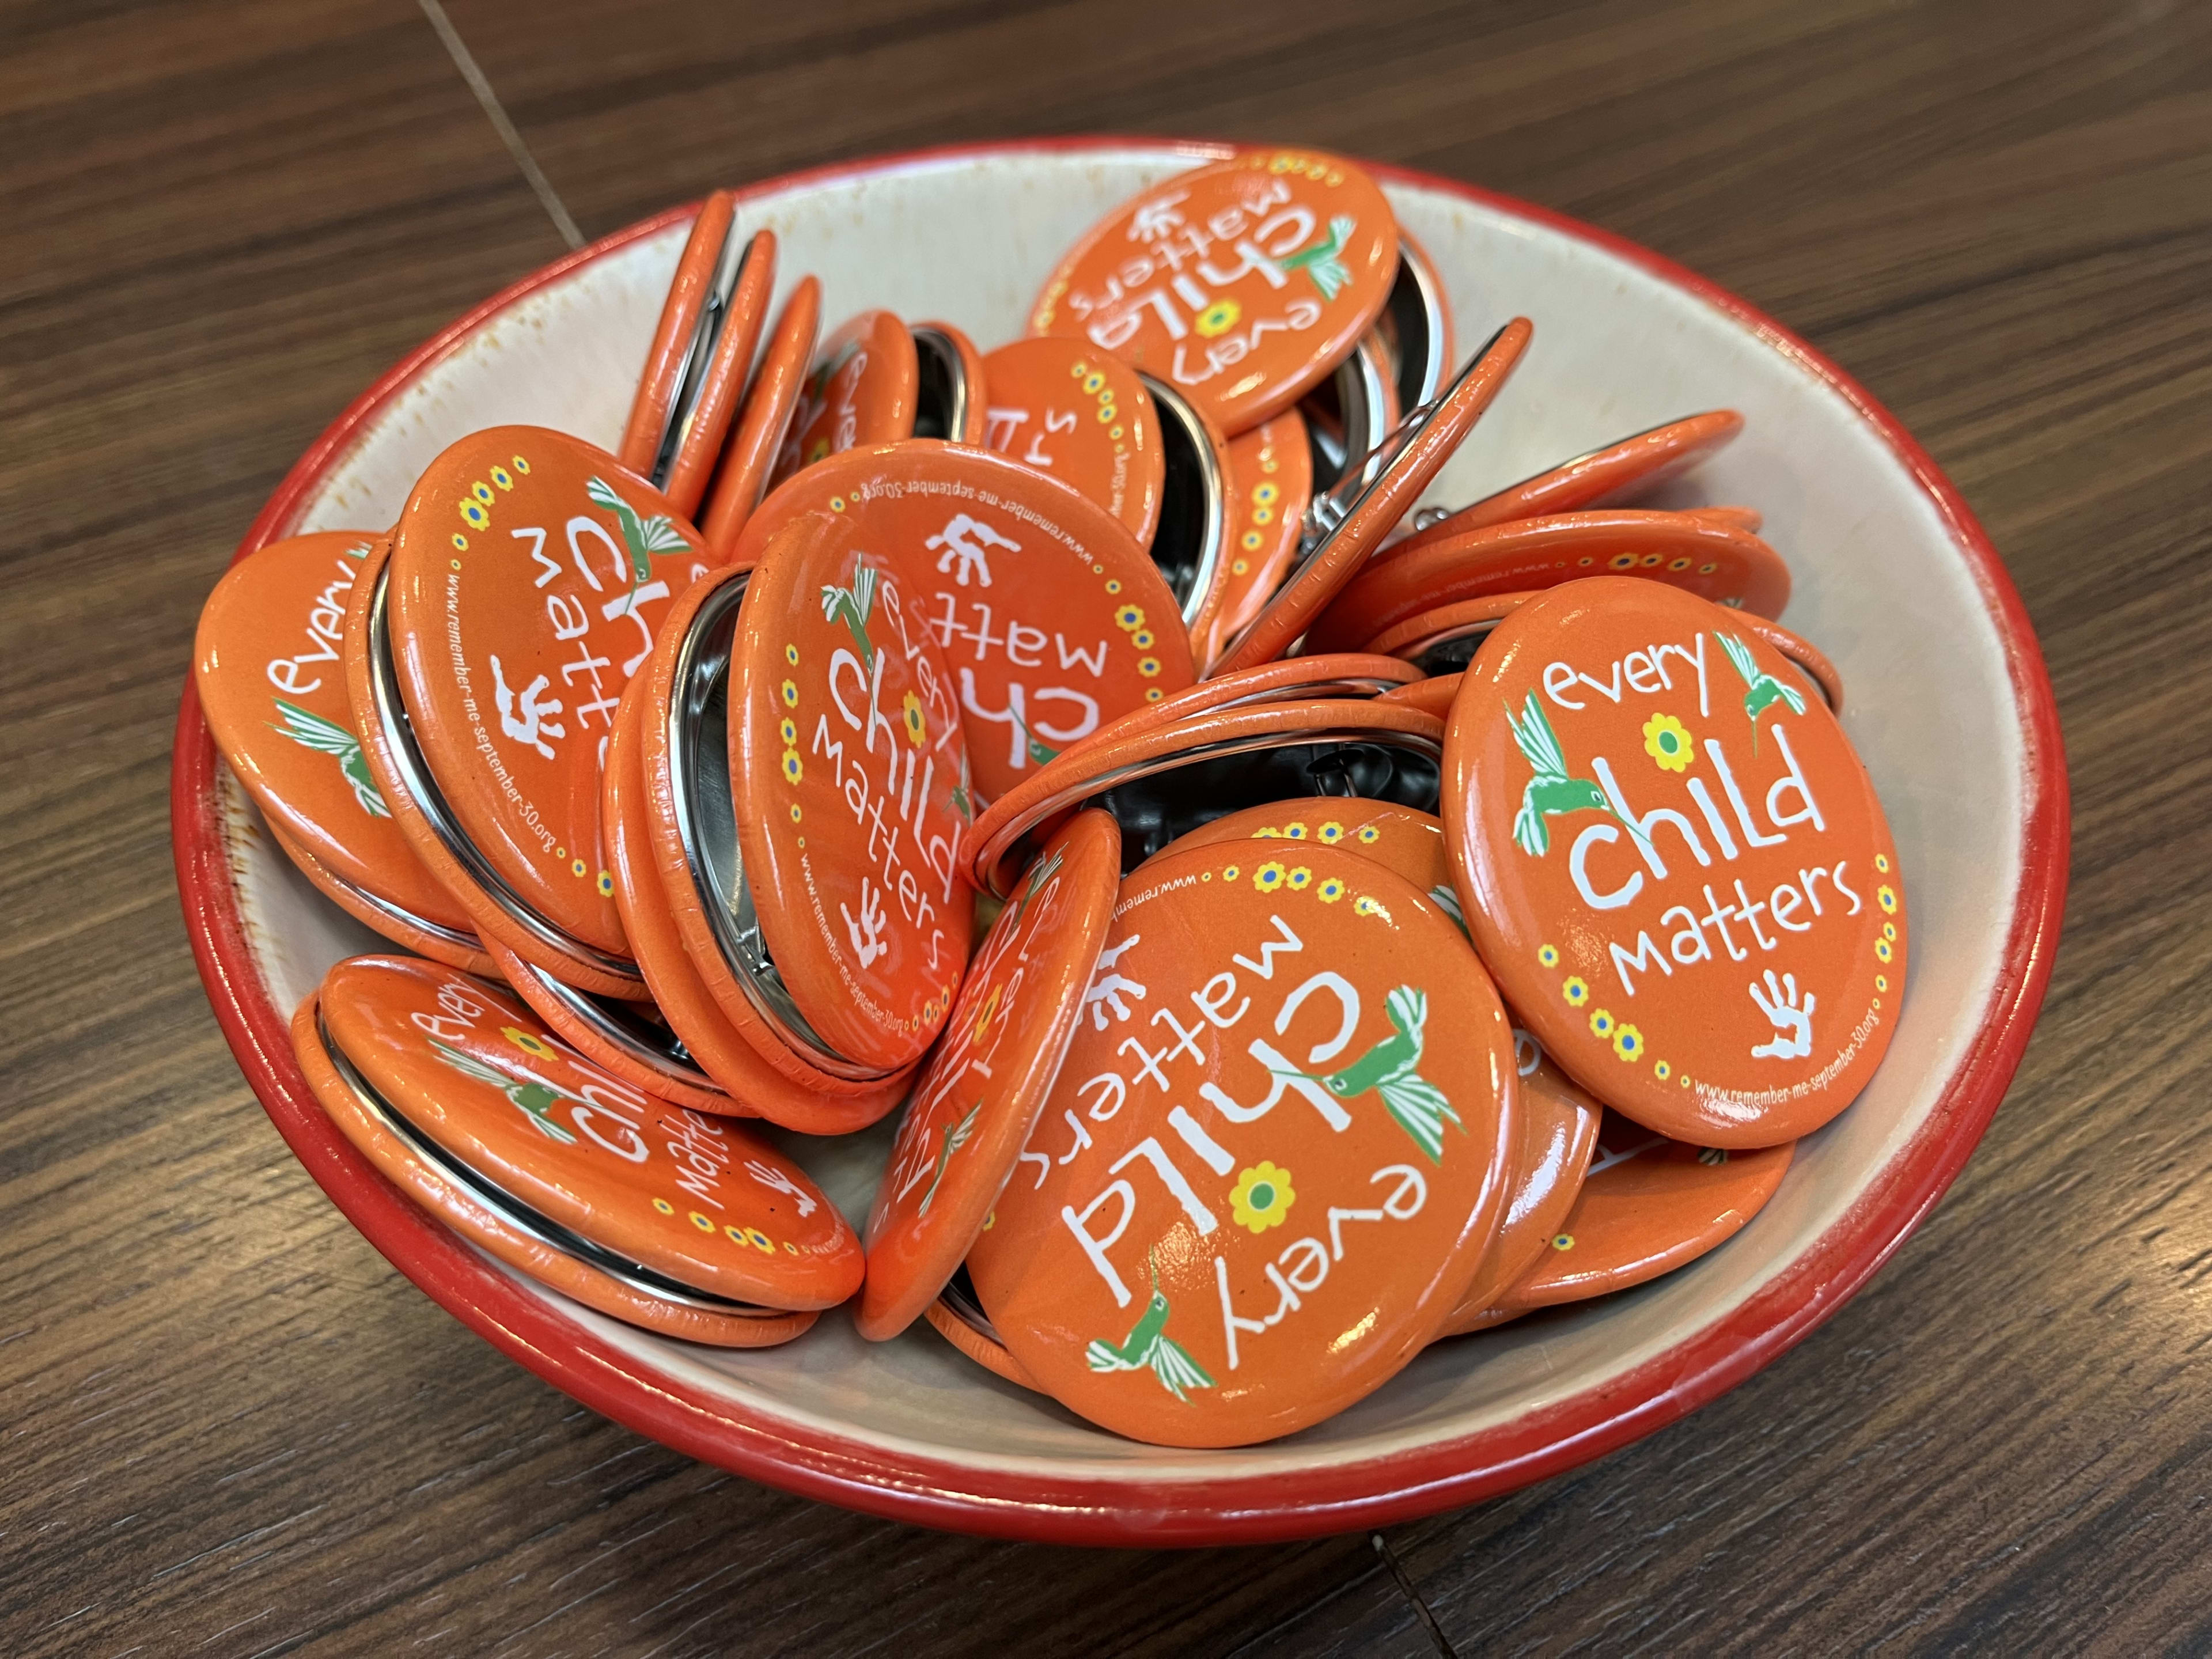 Buttons are shown that say "every child matters."